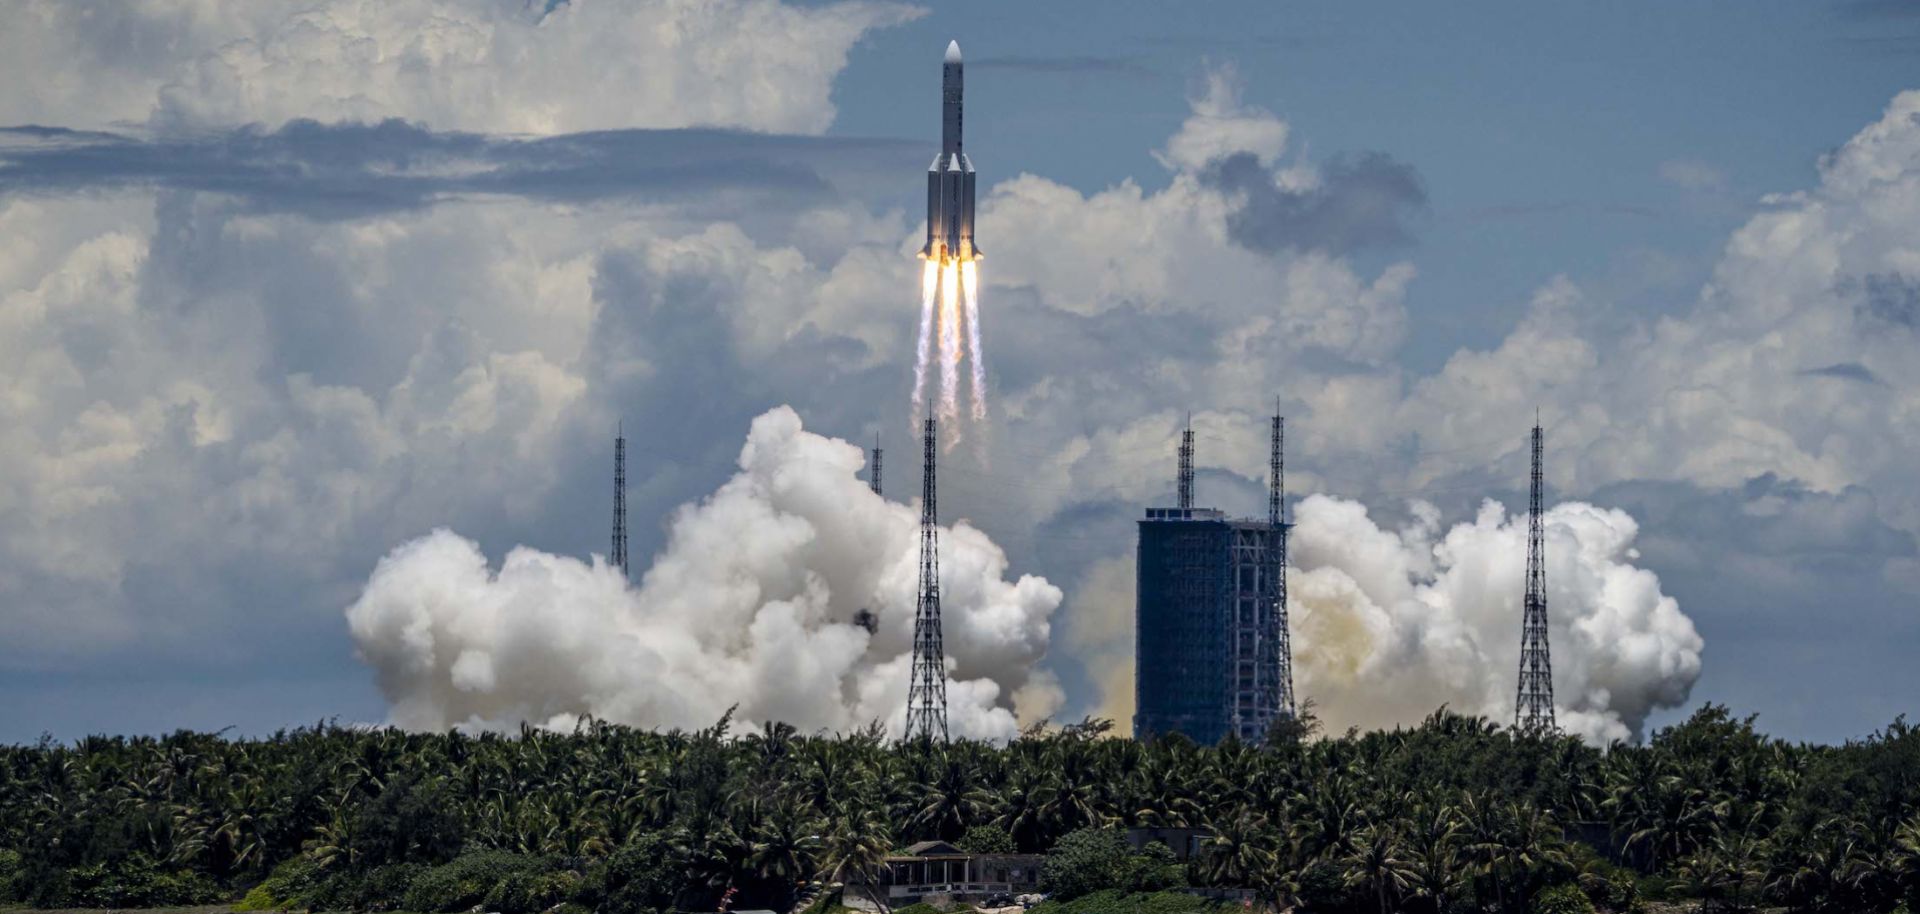 The Tianwen-1 probe is successfully launched on July 23, 2020, in Wenchang, Hainan, China.